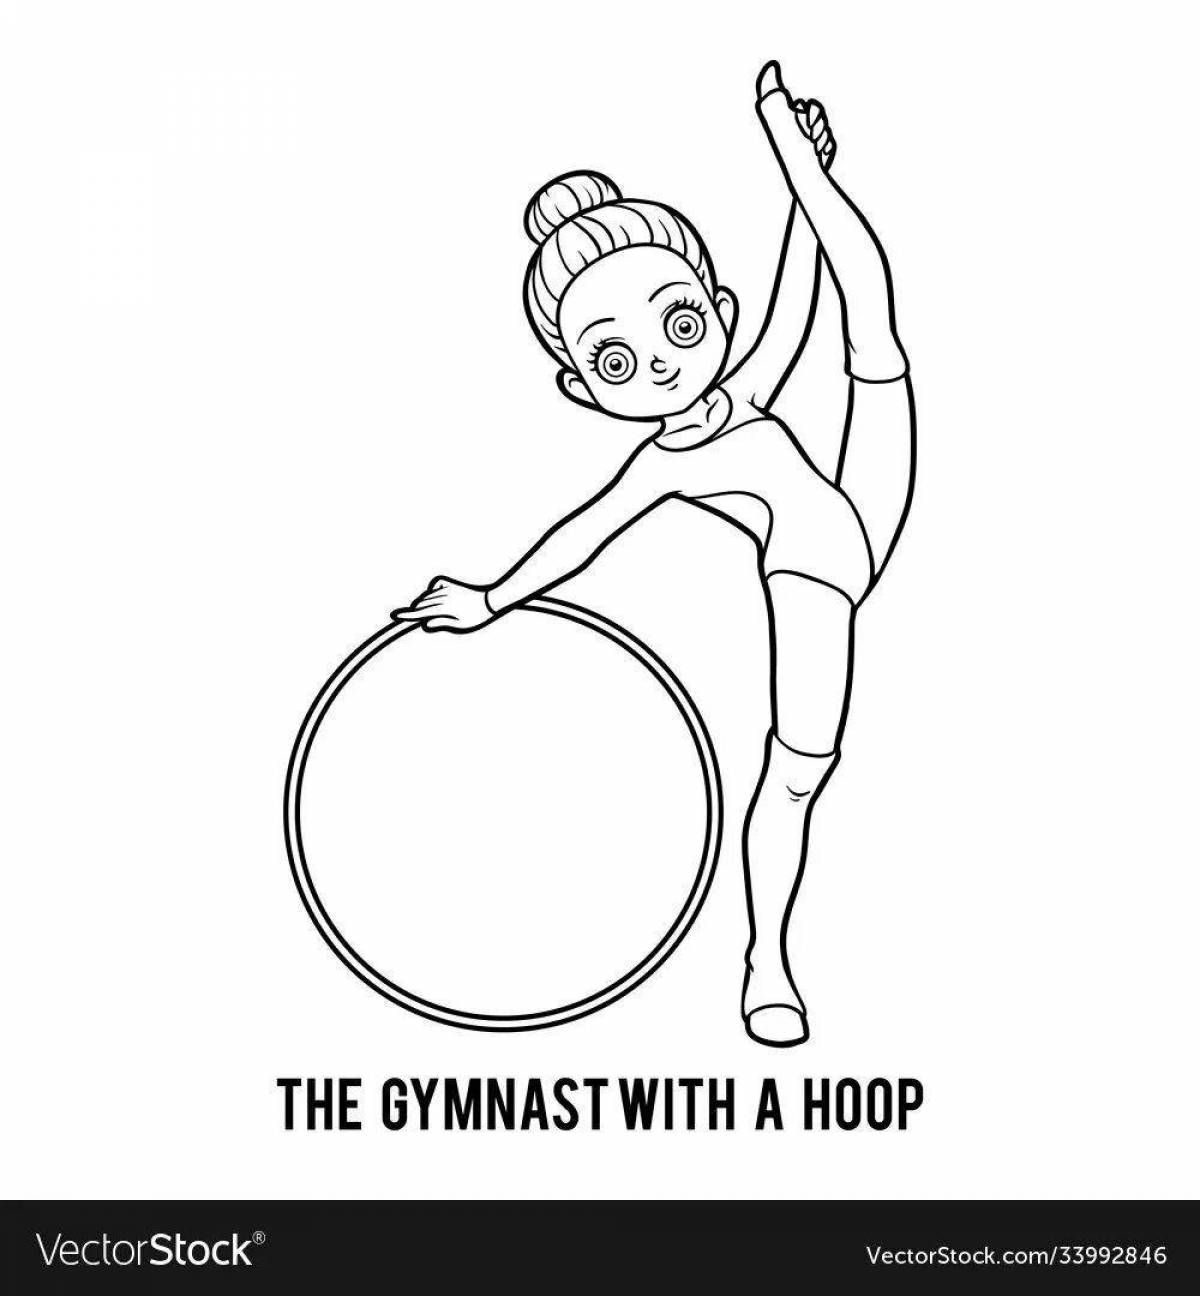 A fascinating gymnast with a hoop